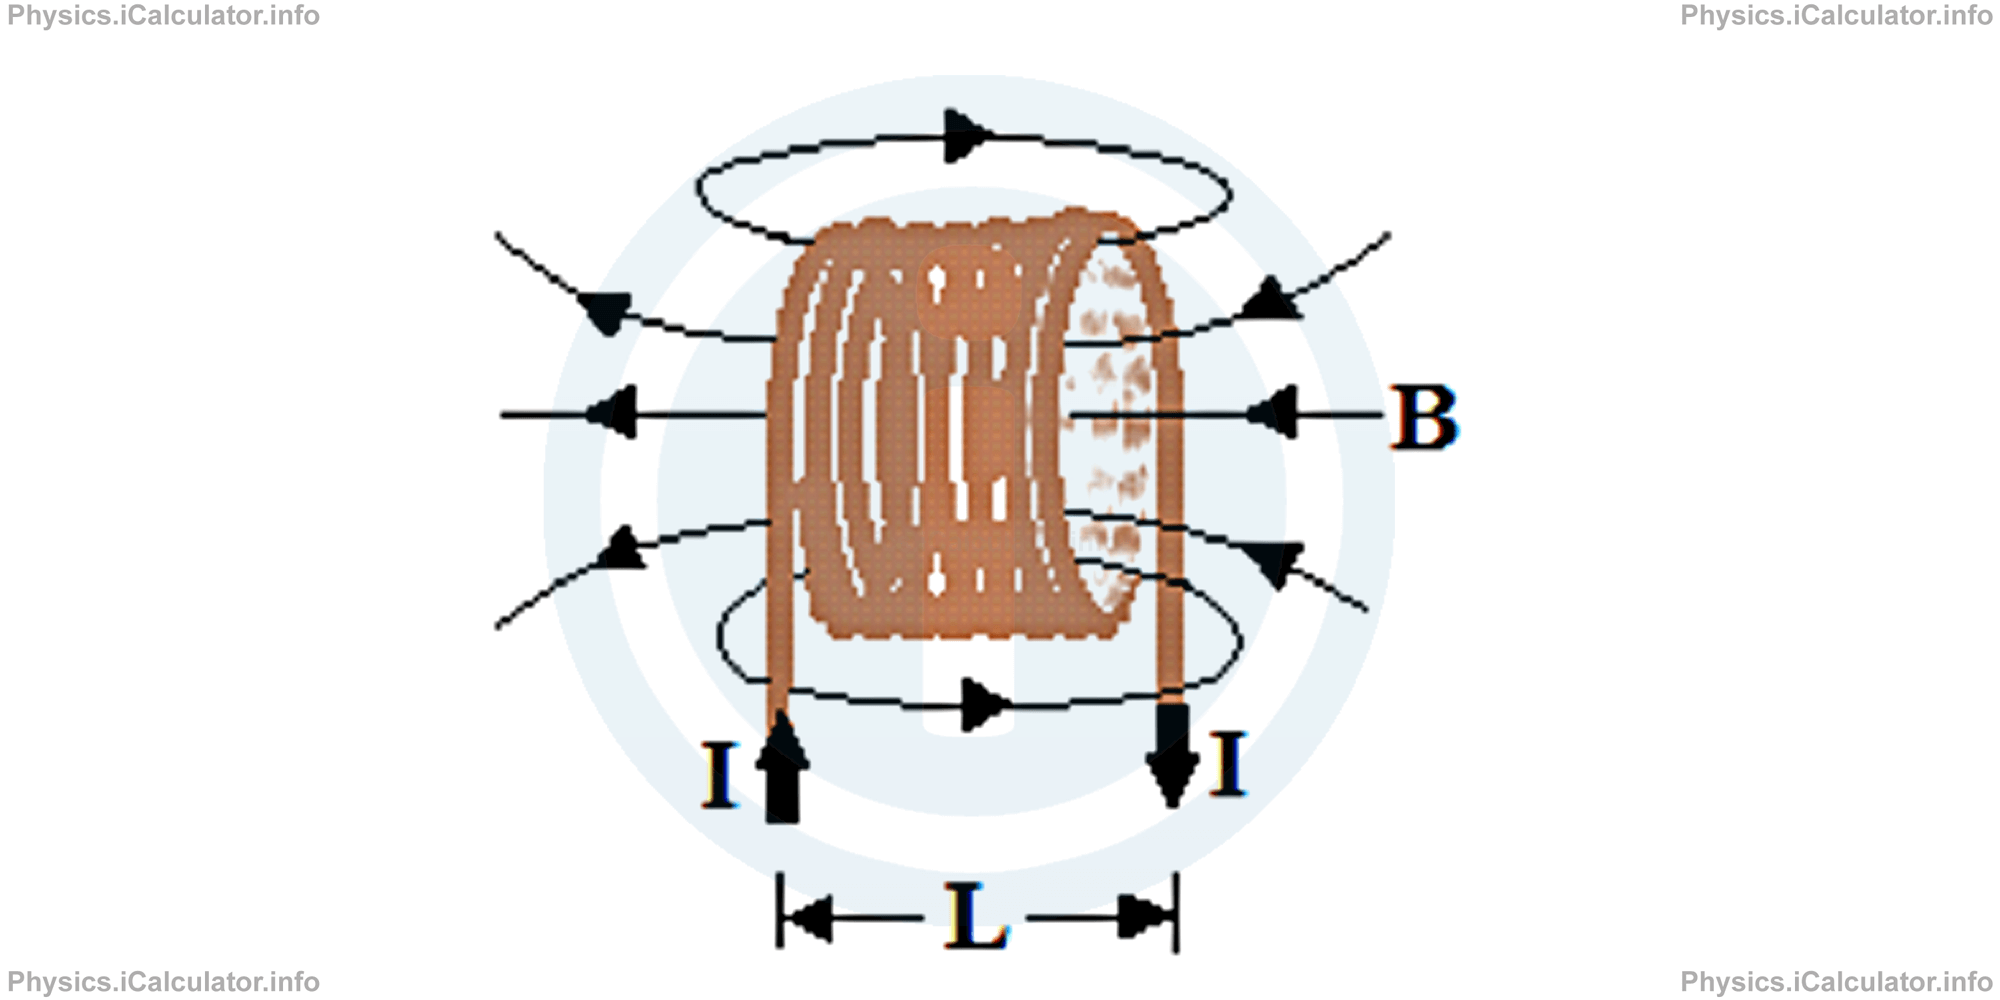 Physics Tutorials: This image provides visual information for the physics tutorial Magnetic Field Produced by Electric Currents 